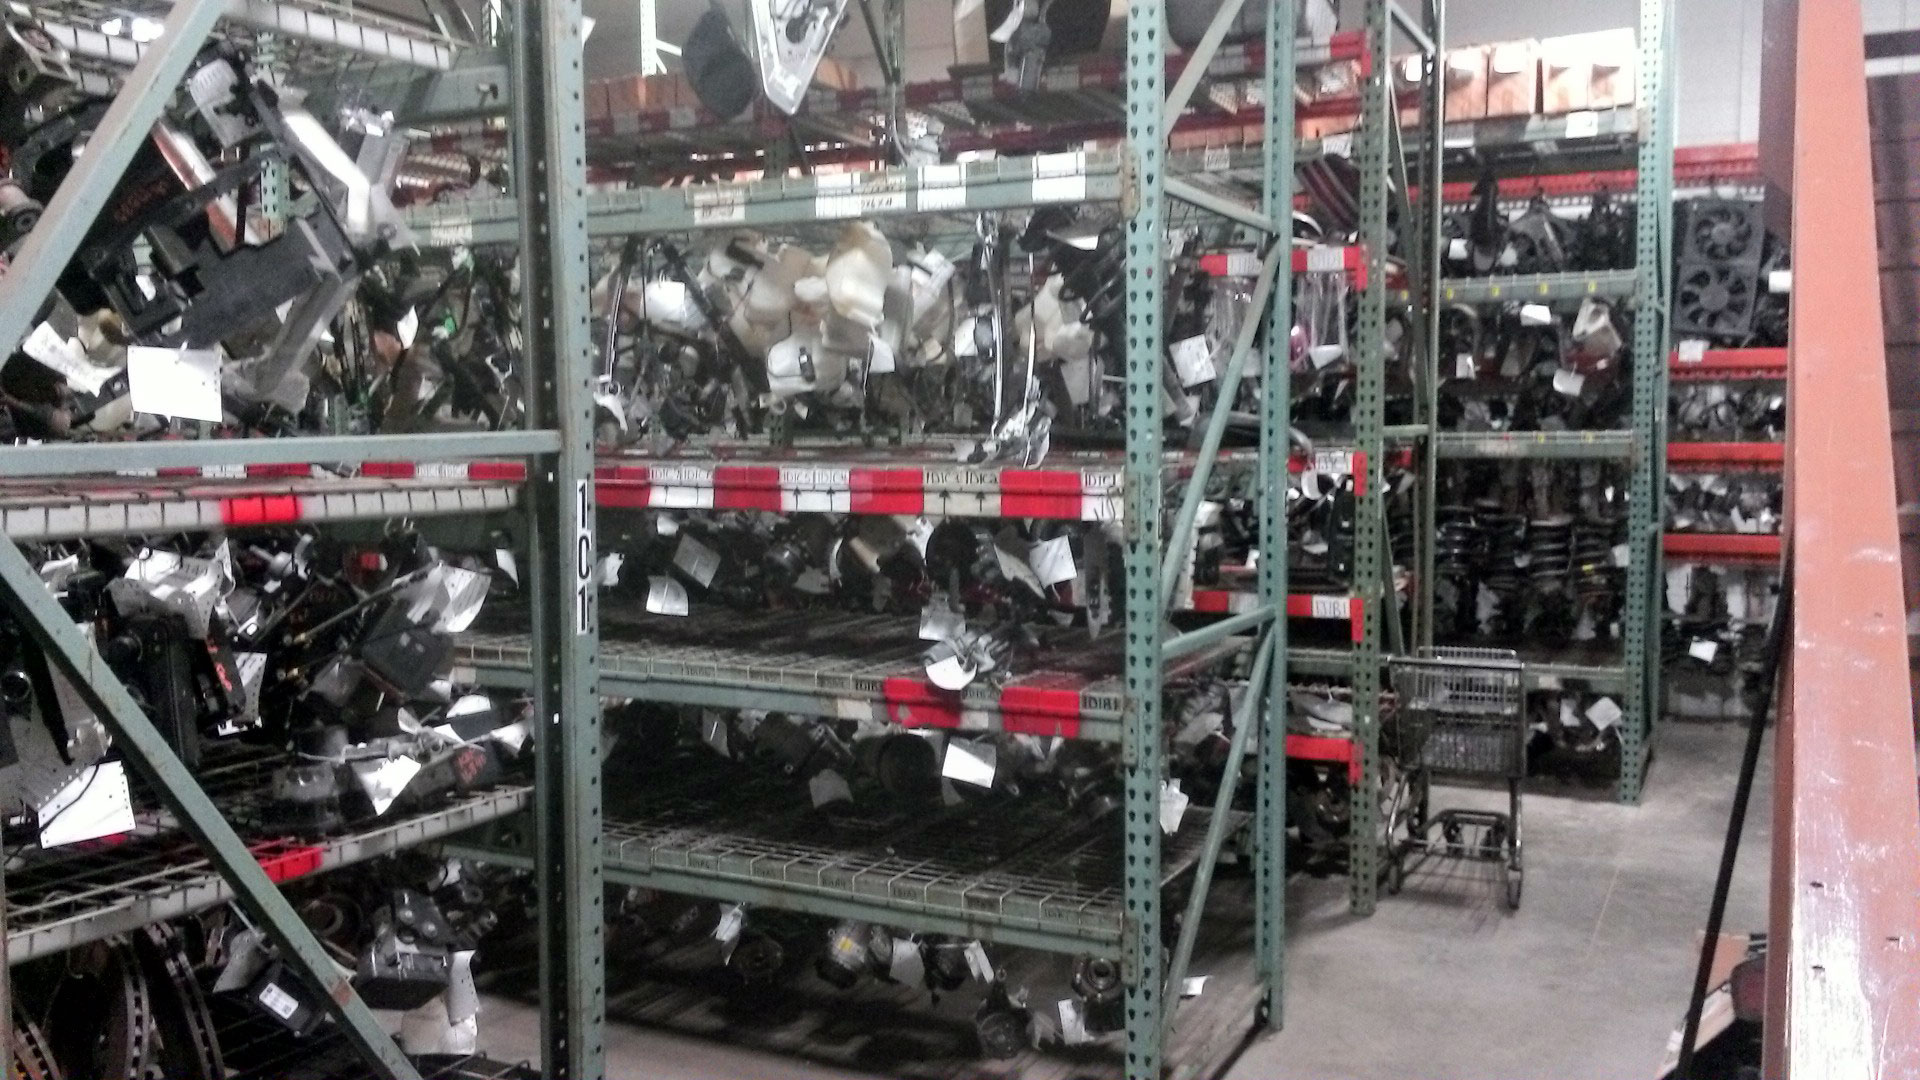 Quality used auto parts at Ken's Auto Parts